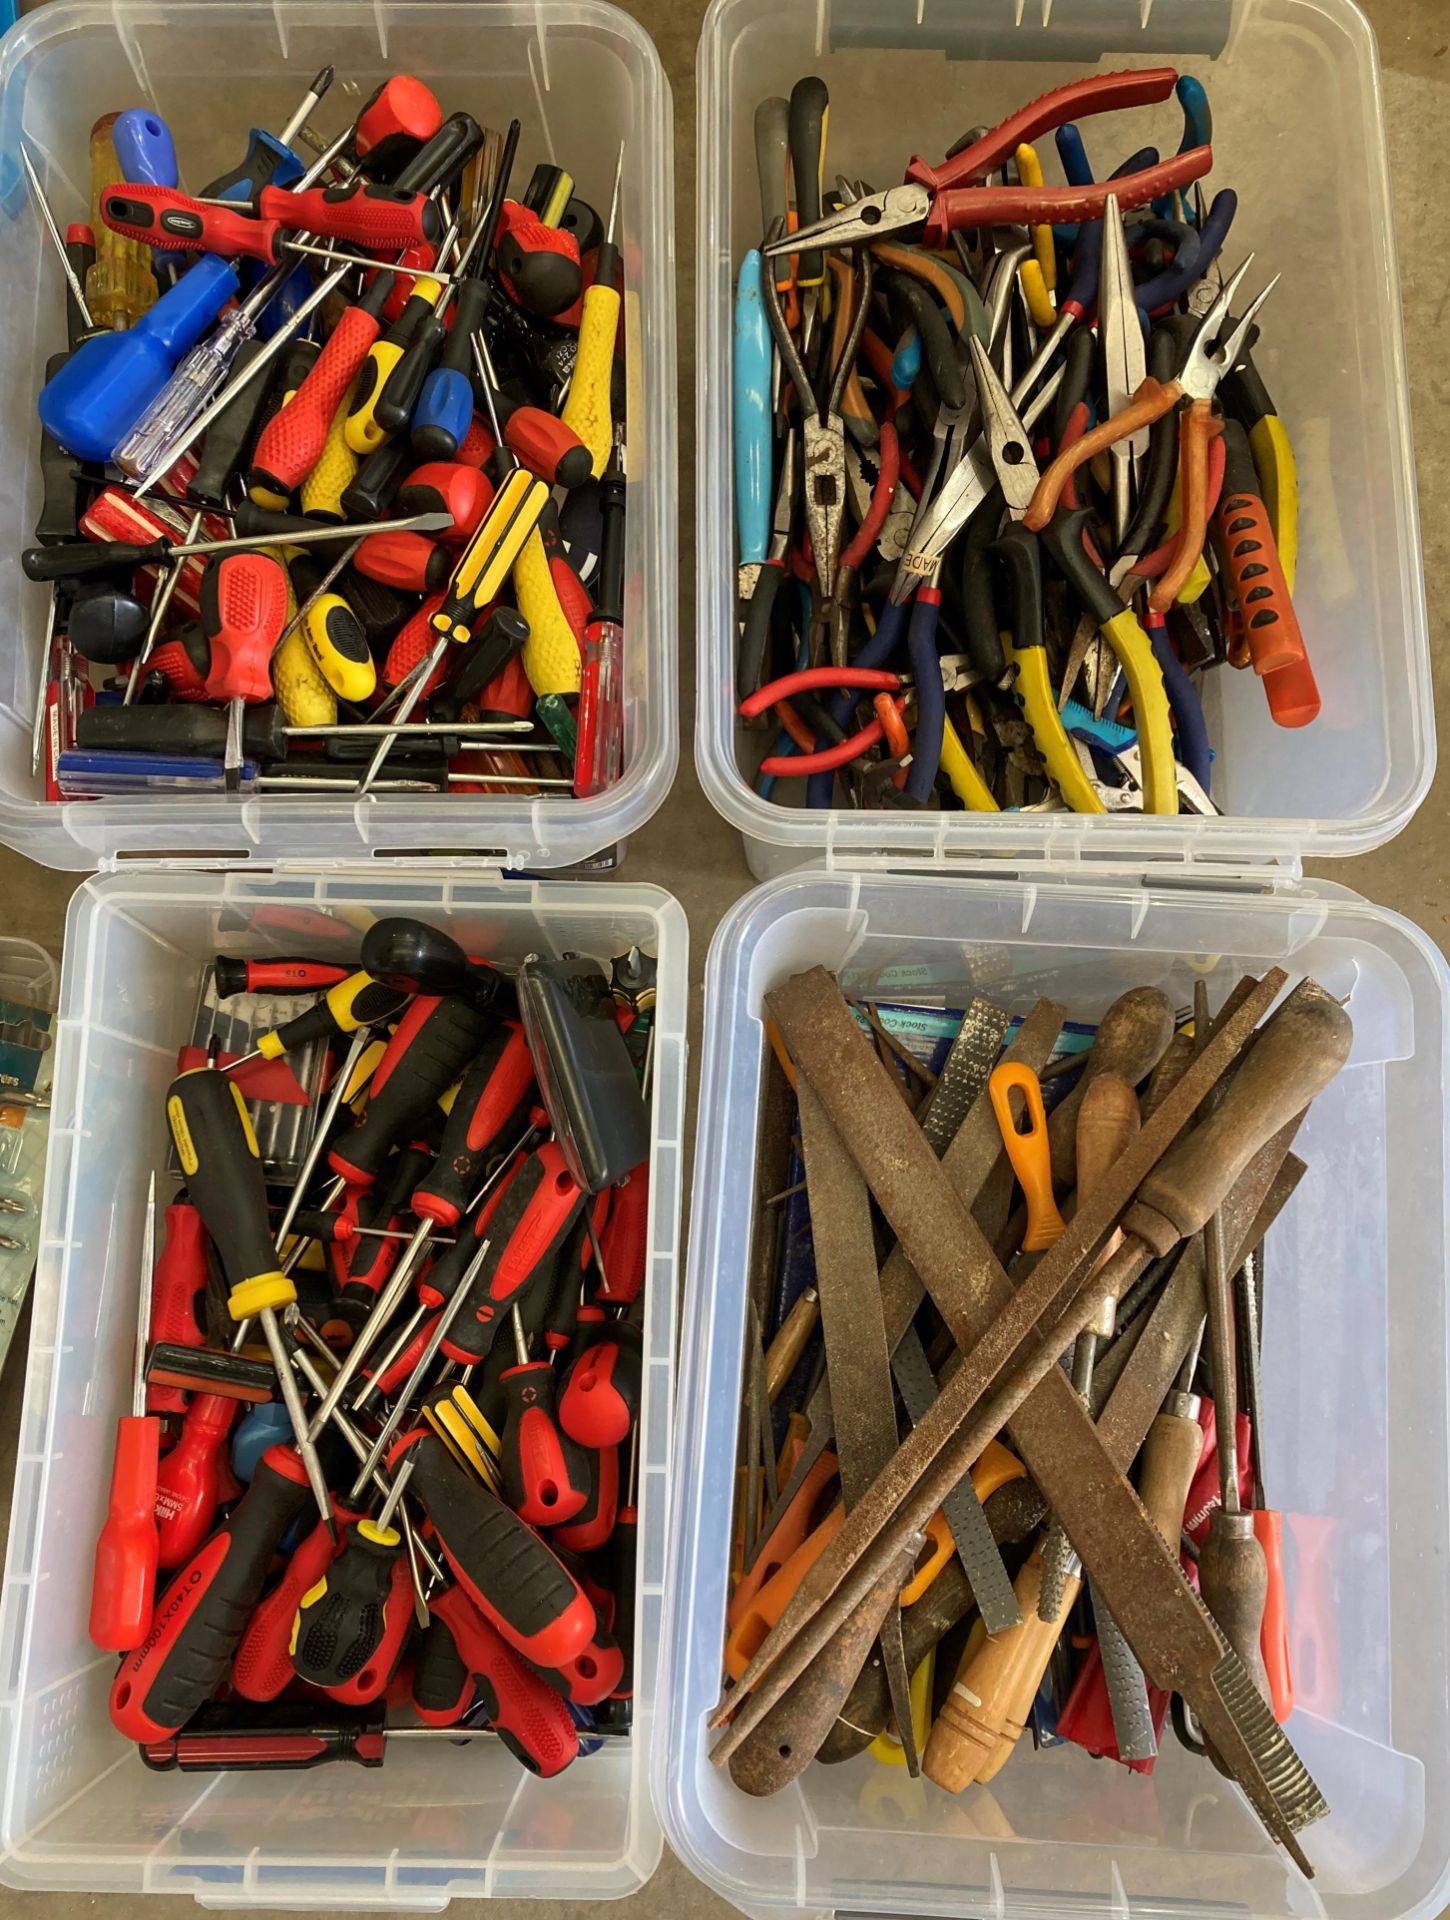 Contents to four boxes - a large quantity of assorted screwdrivers, pliers, flies etc.